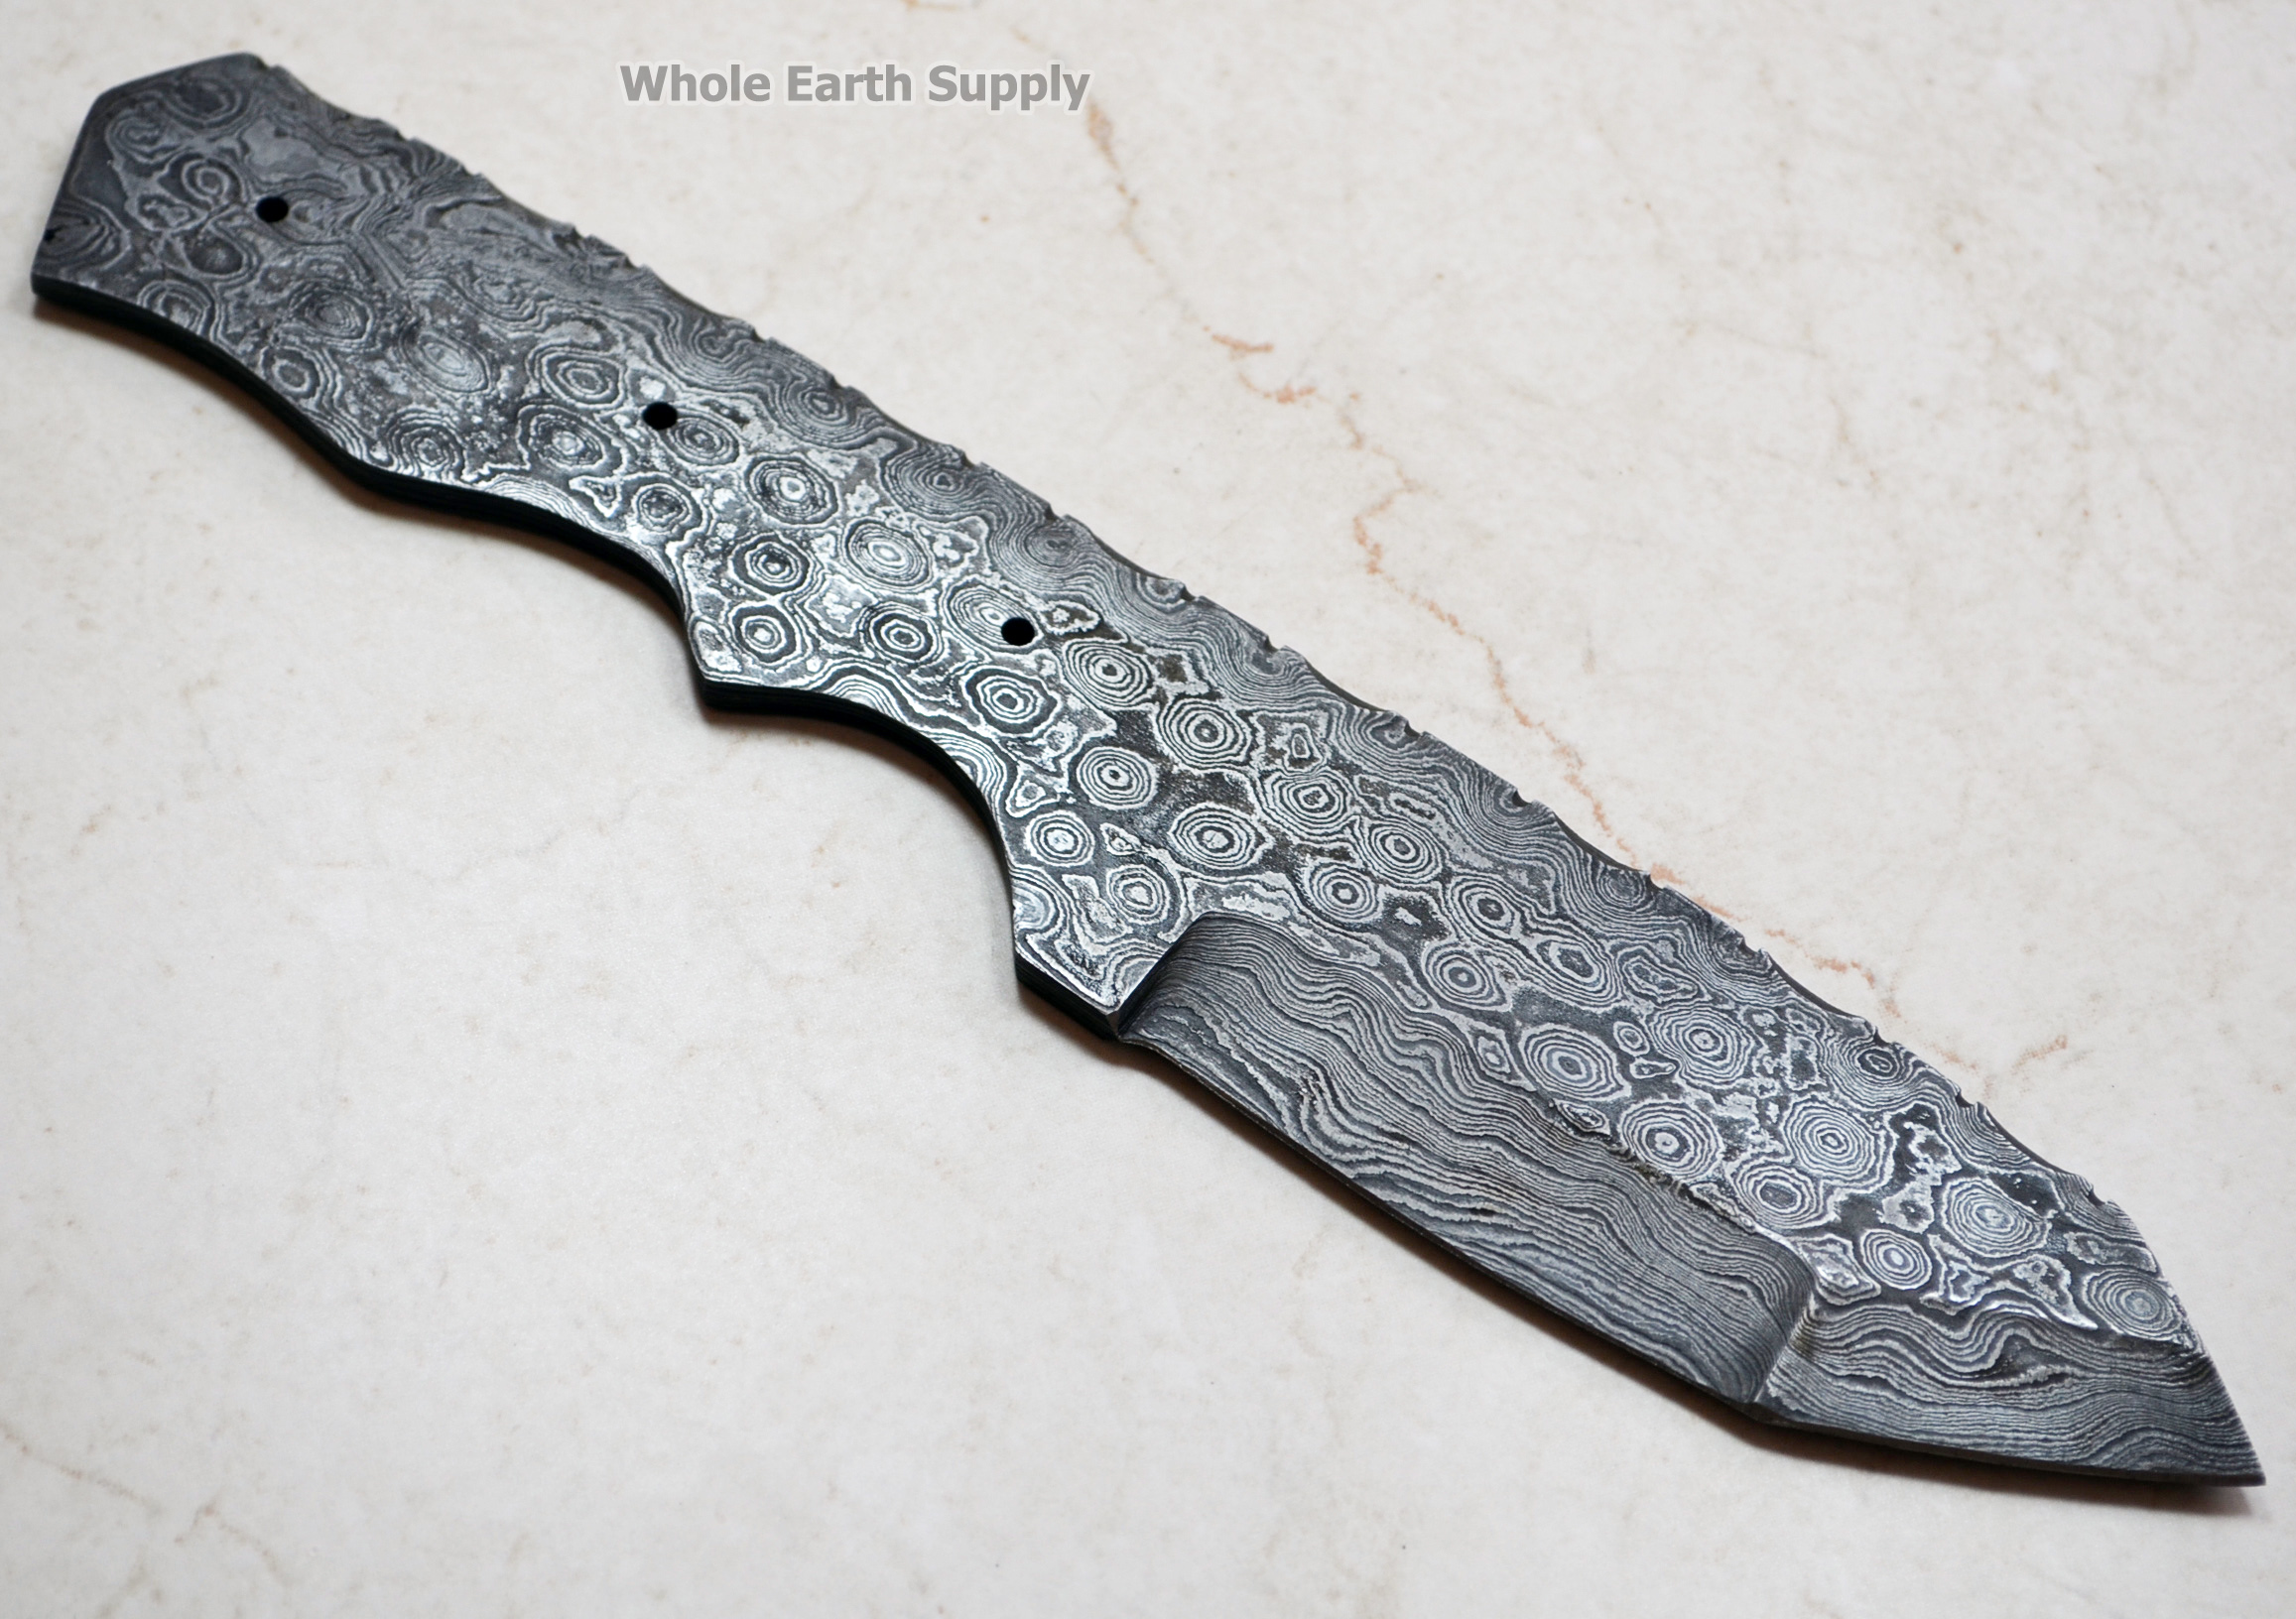 Damascus Knife Blank Blade Tanto Tactical Hunting 1095 High Carbon Steel Making